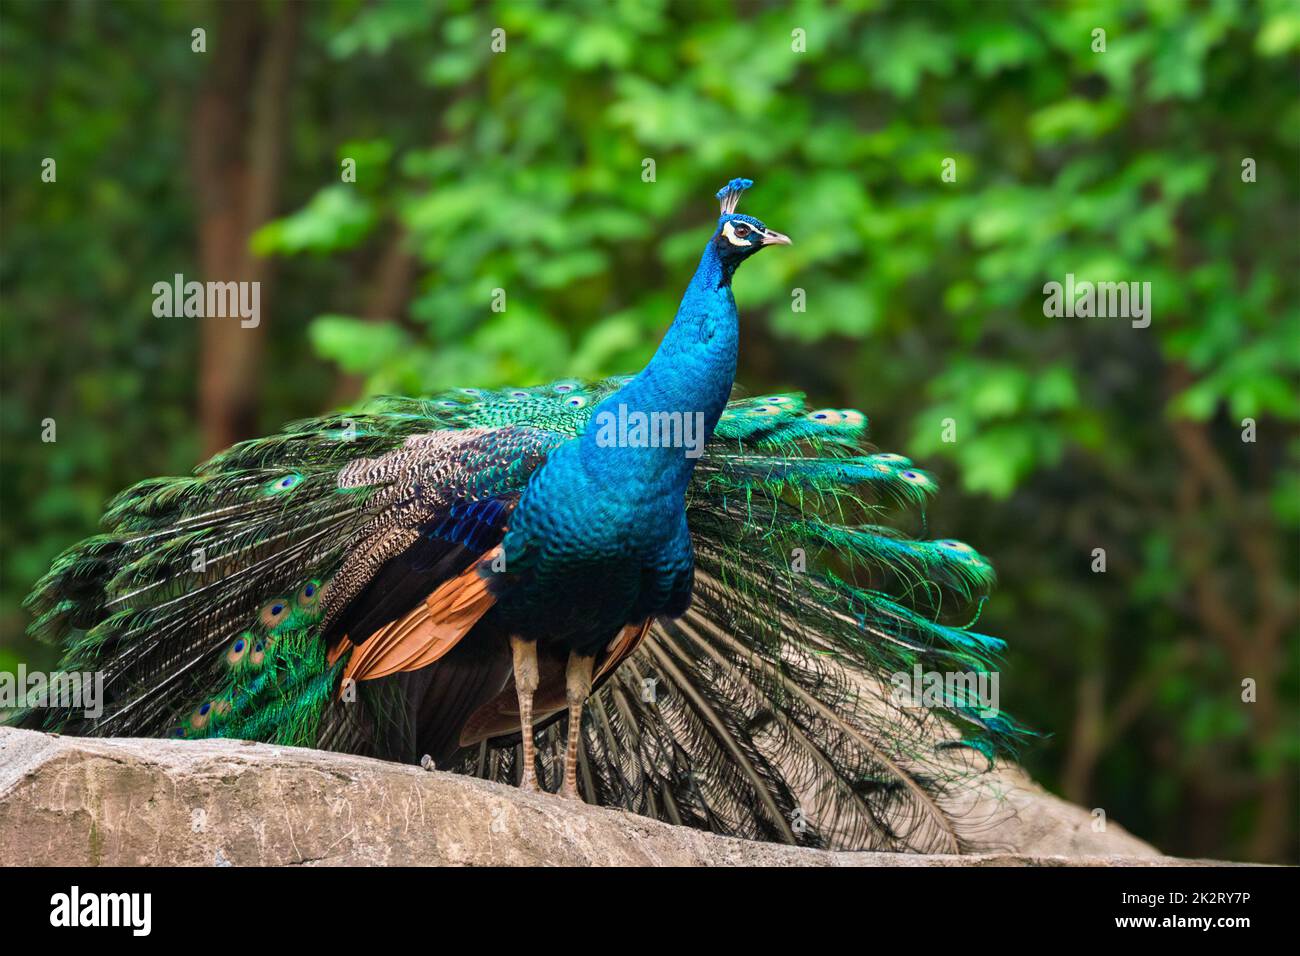 Peacock bird in forest Stock Photo